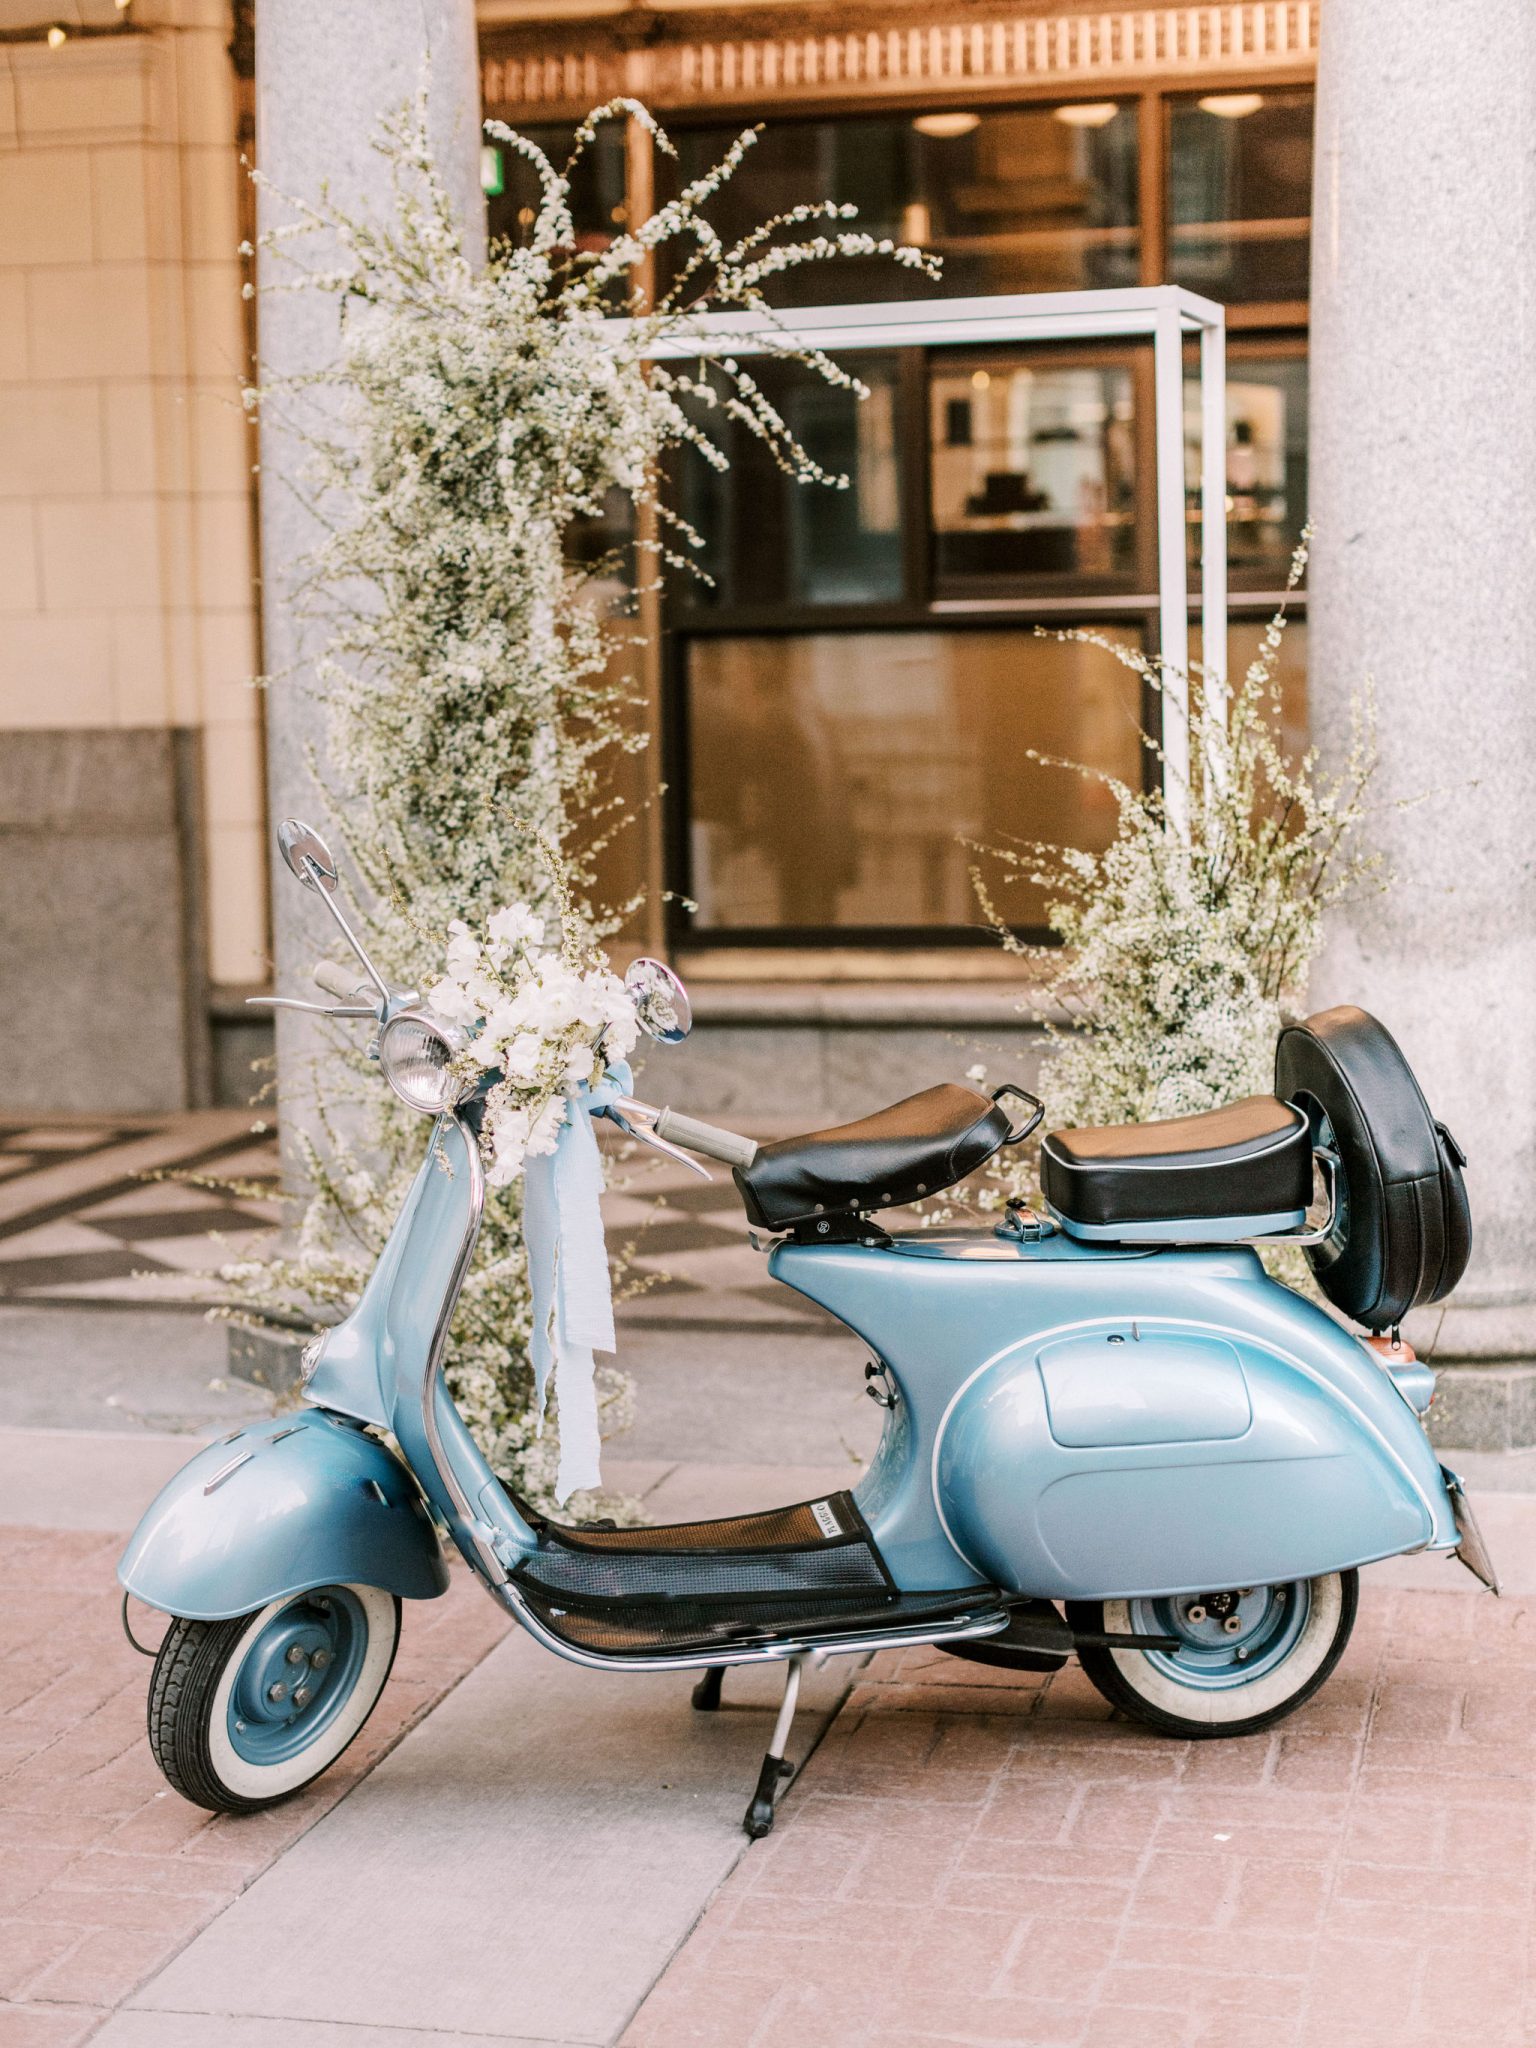 Chic blue vespa on the streets of downtown Calgary for this modern downtown elopement